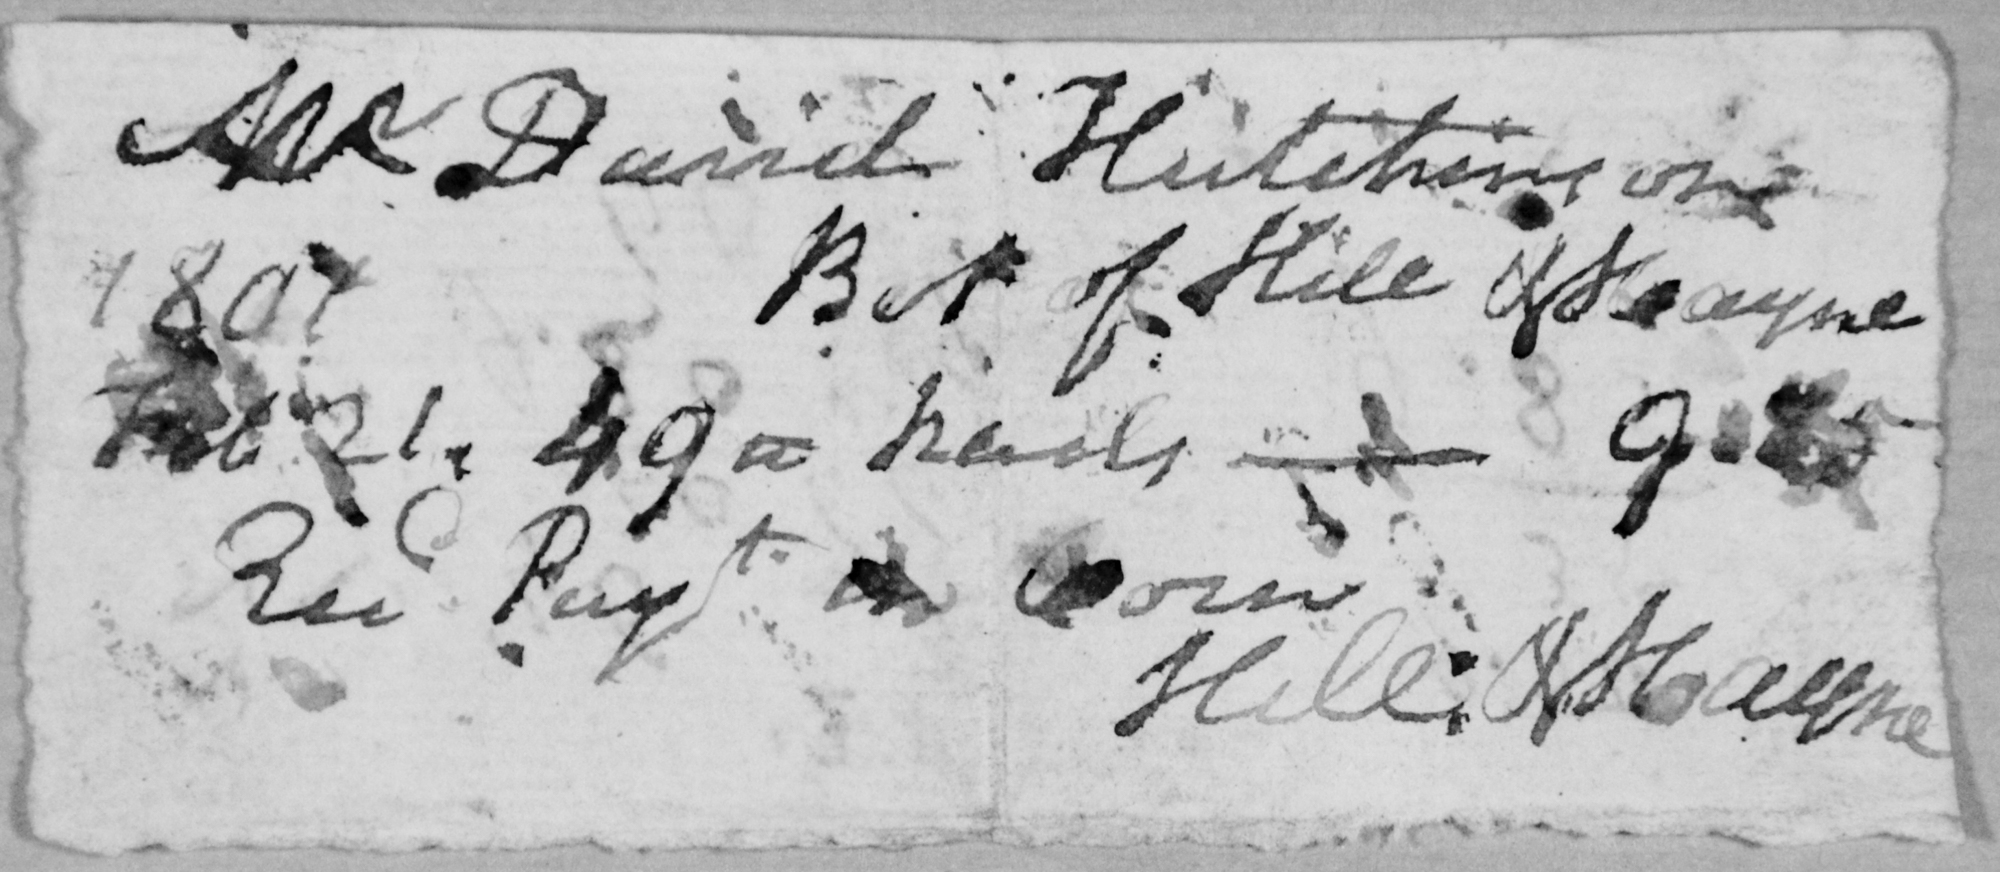 HILL AND HAYNE IRONWORKS BILL FOR NAILS, 1801 TO DAVID HUTCHISON OF YORK COUNTY SC